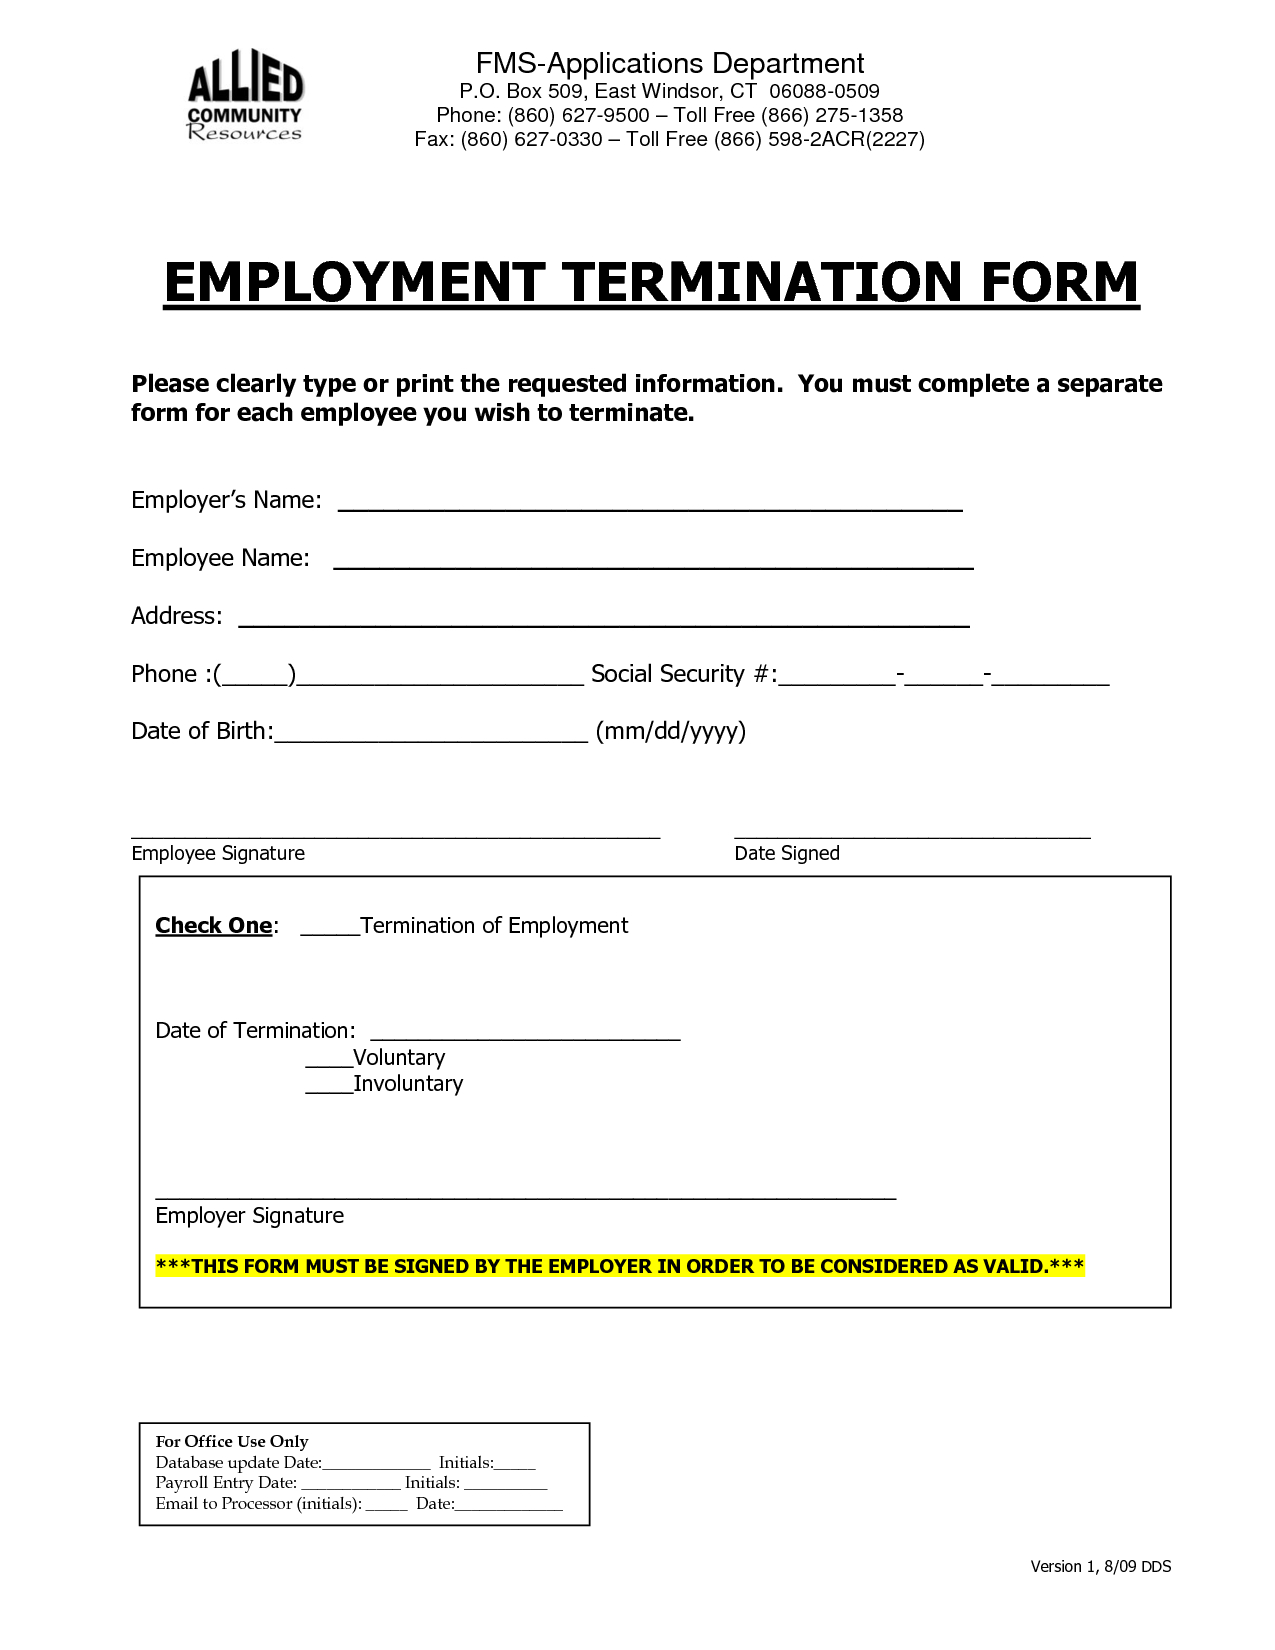 Termination Form Template Employee Termination Letter For For Word Employee Suggestion Form Template